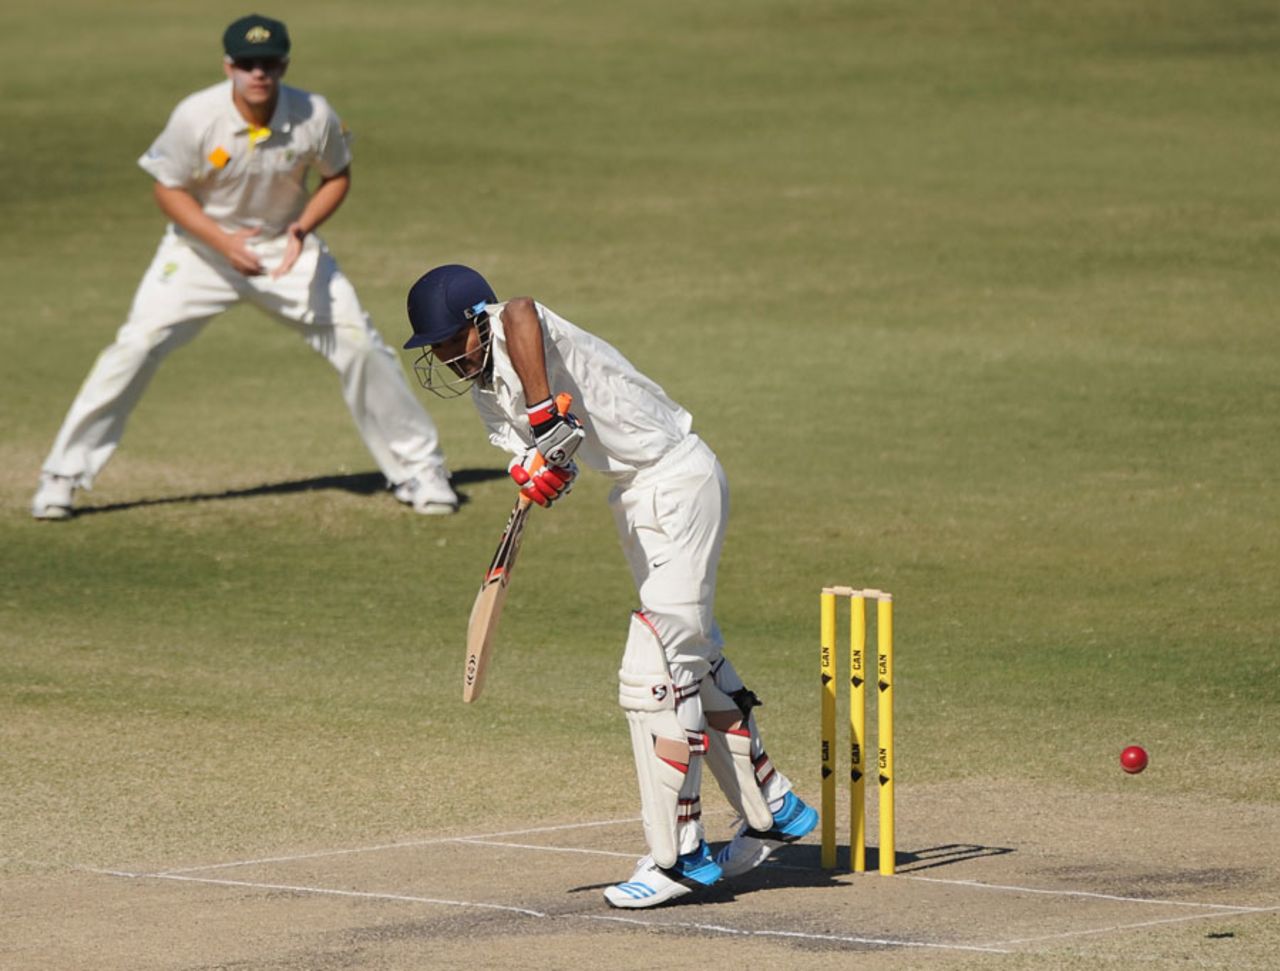 KL Rahul plays from deep within the crease, Australia A v India A, 1st unofficial Test, Brisbane, 4th day, July 9, 2014